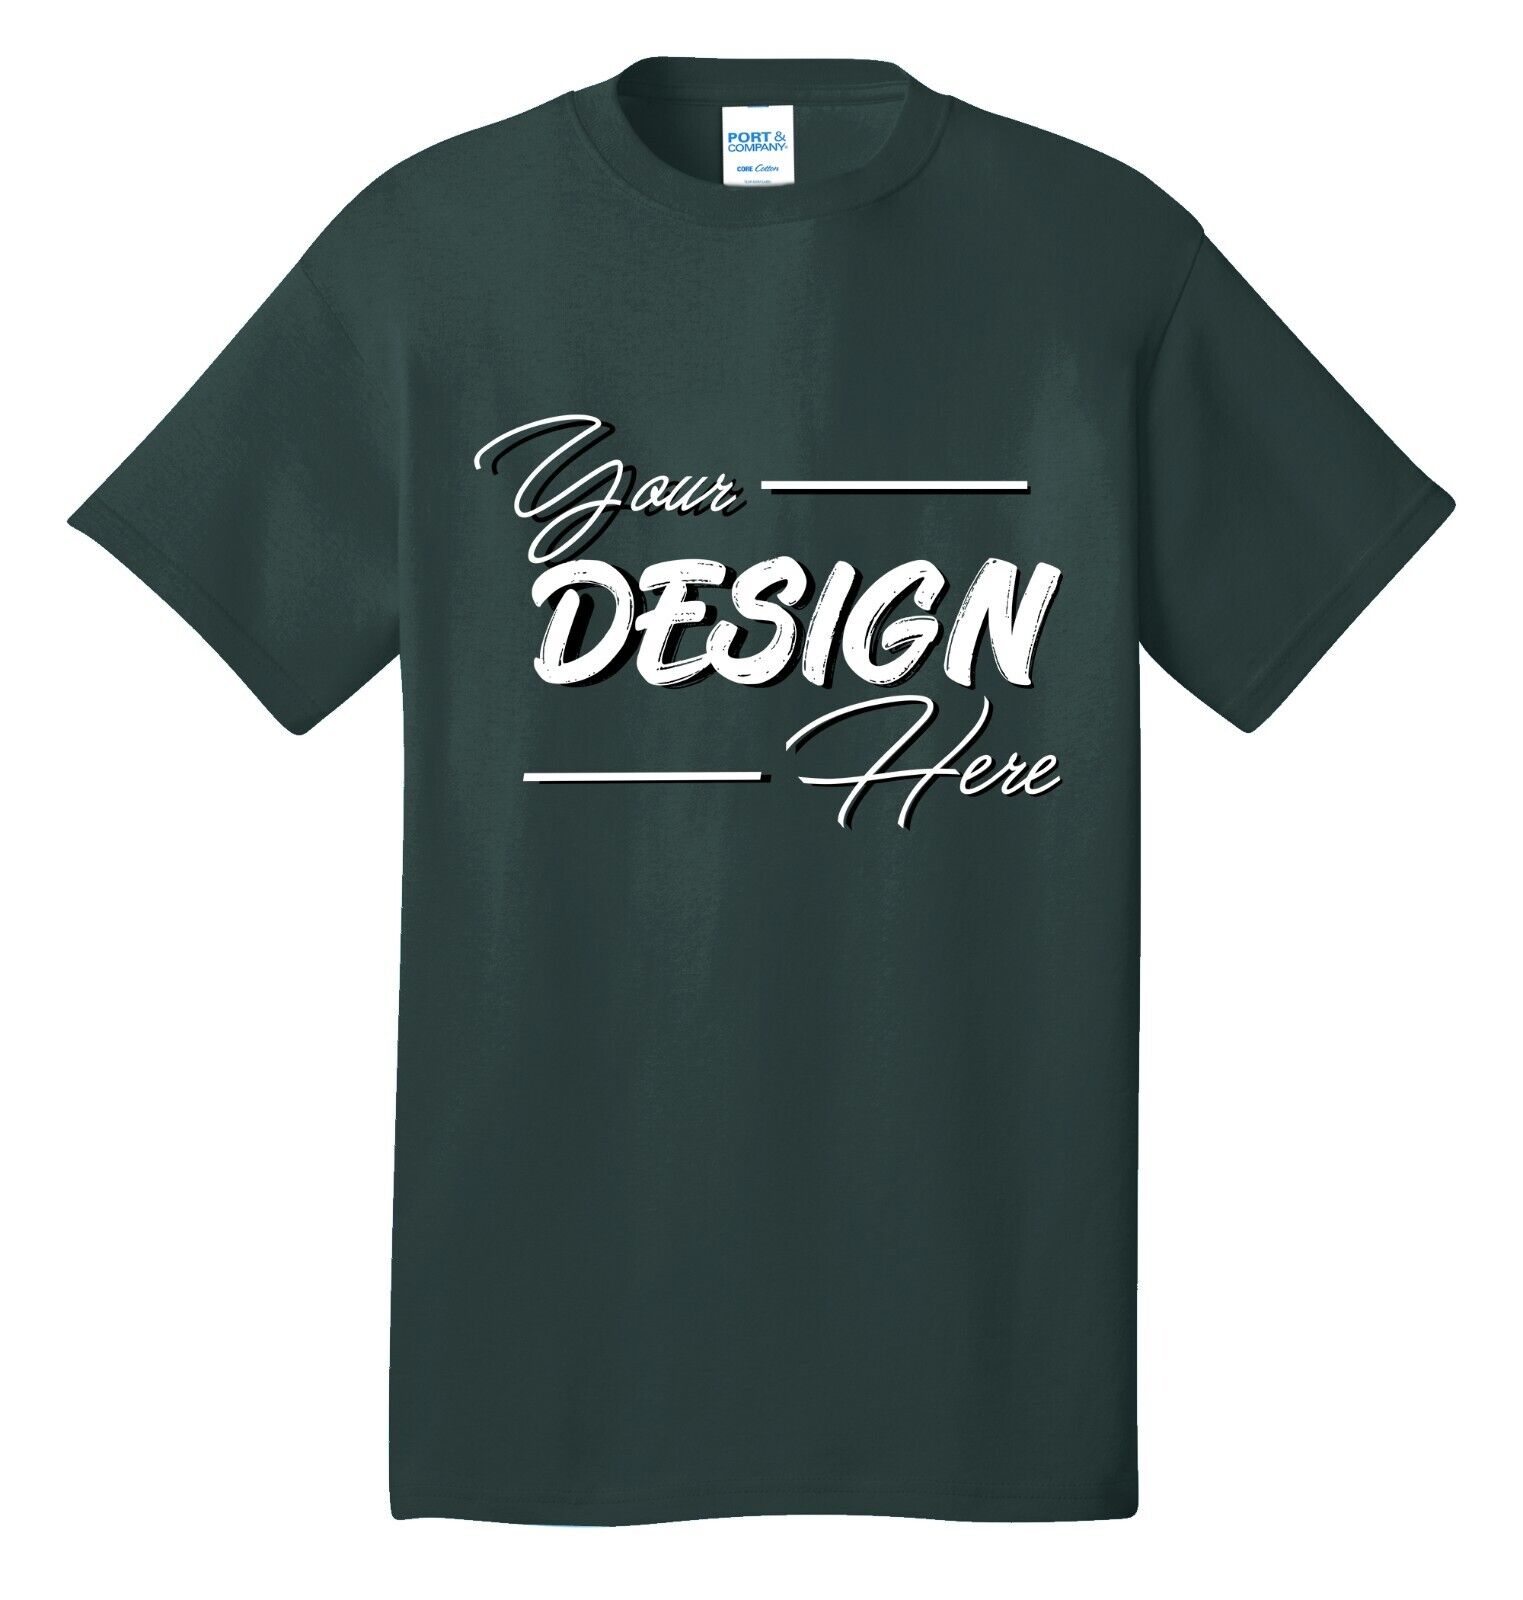 Ink Stitch Unisex Design Your Own Custom Printed Cotton T-shirts